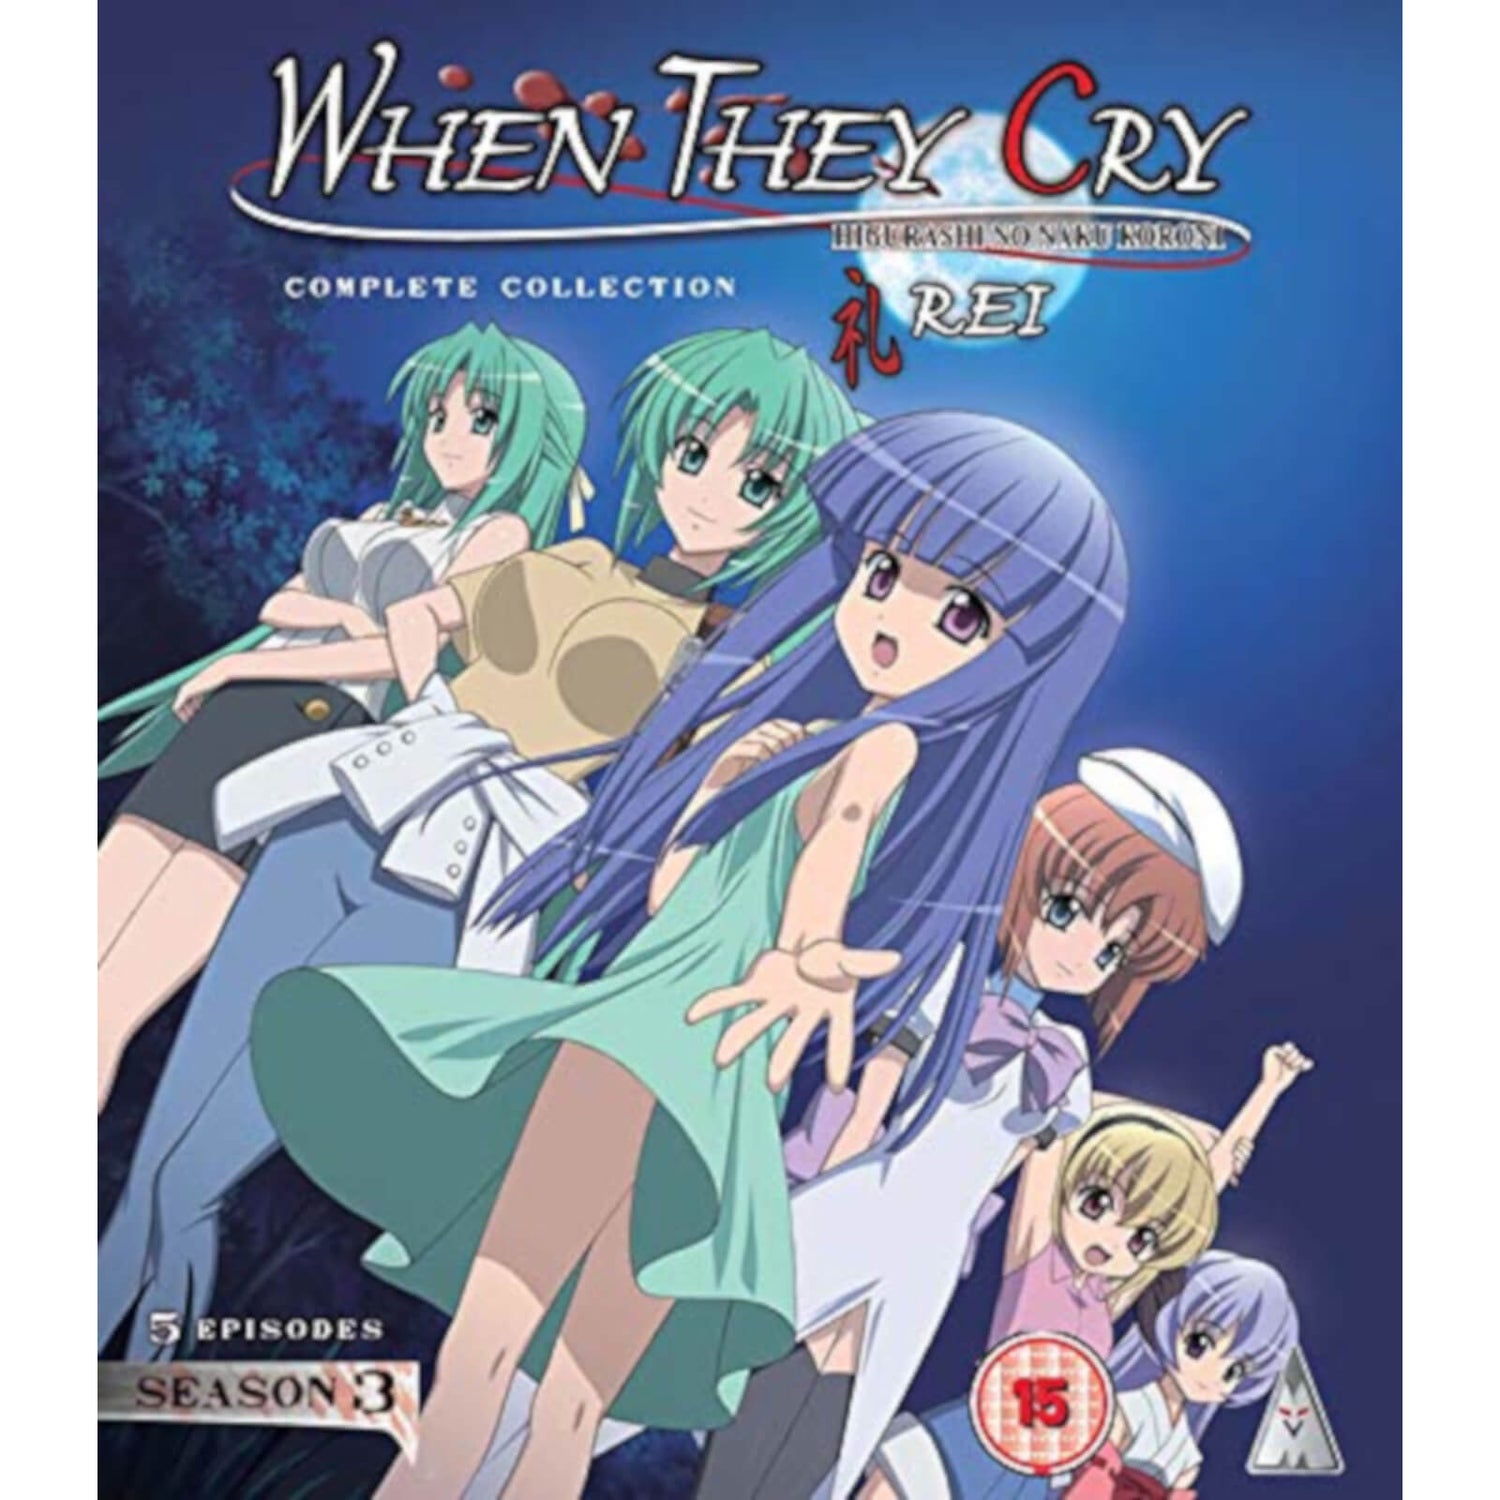 When They Cry: Rei Season 3 Collection